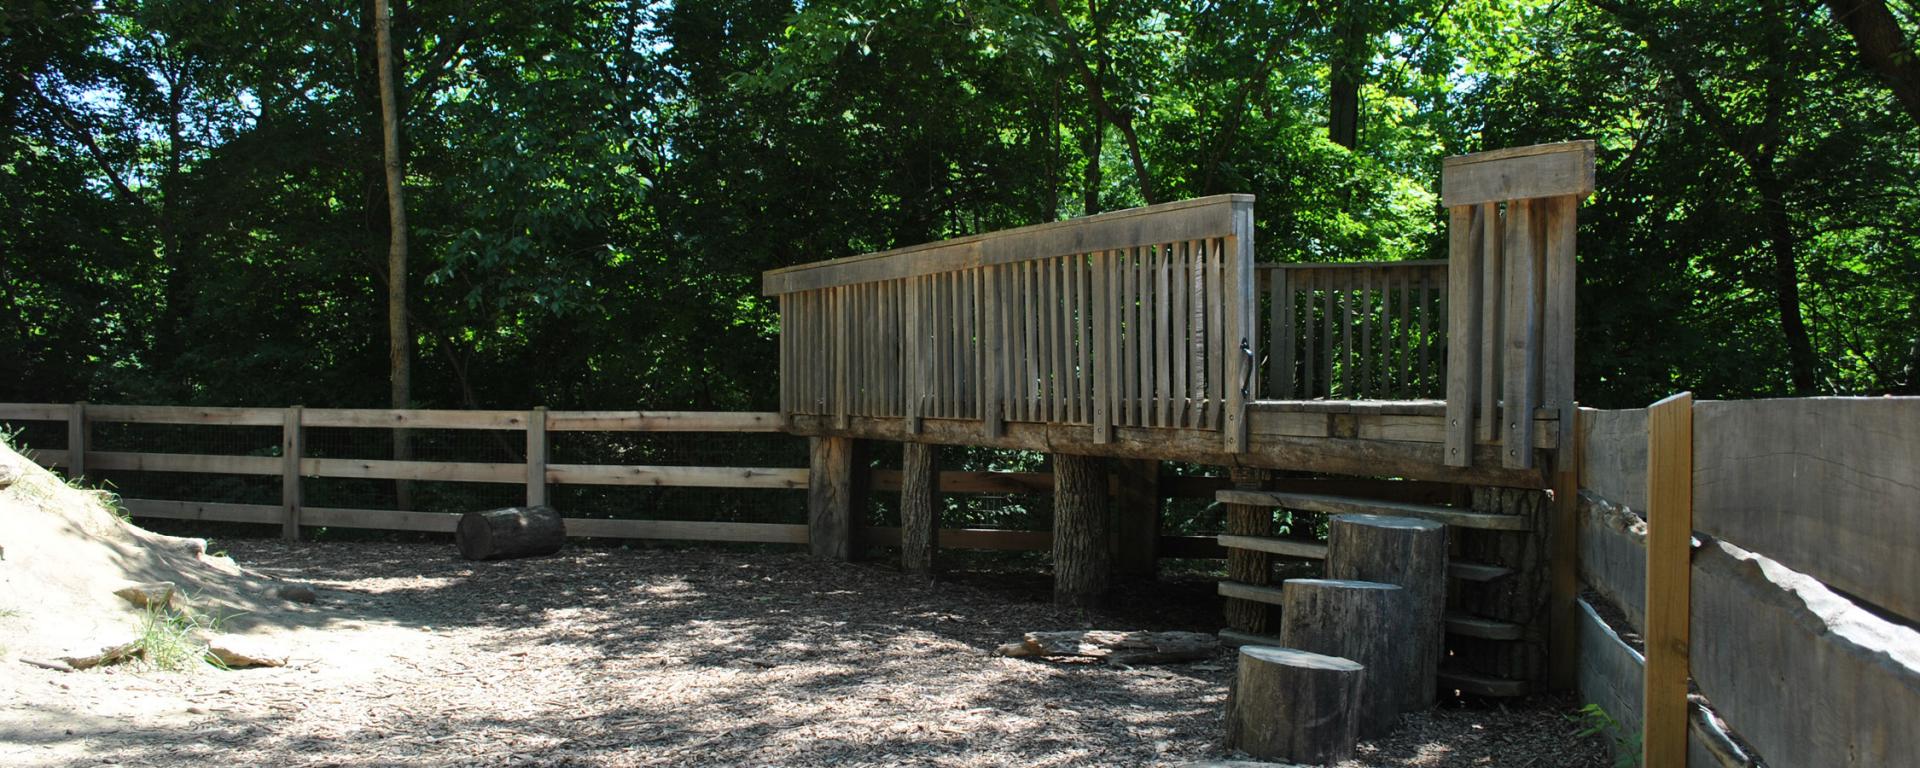 wood climbing structure at park